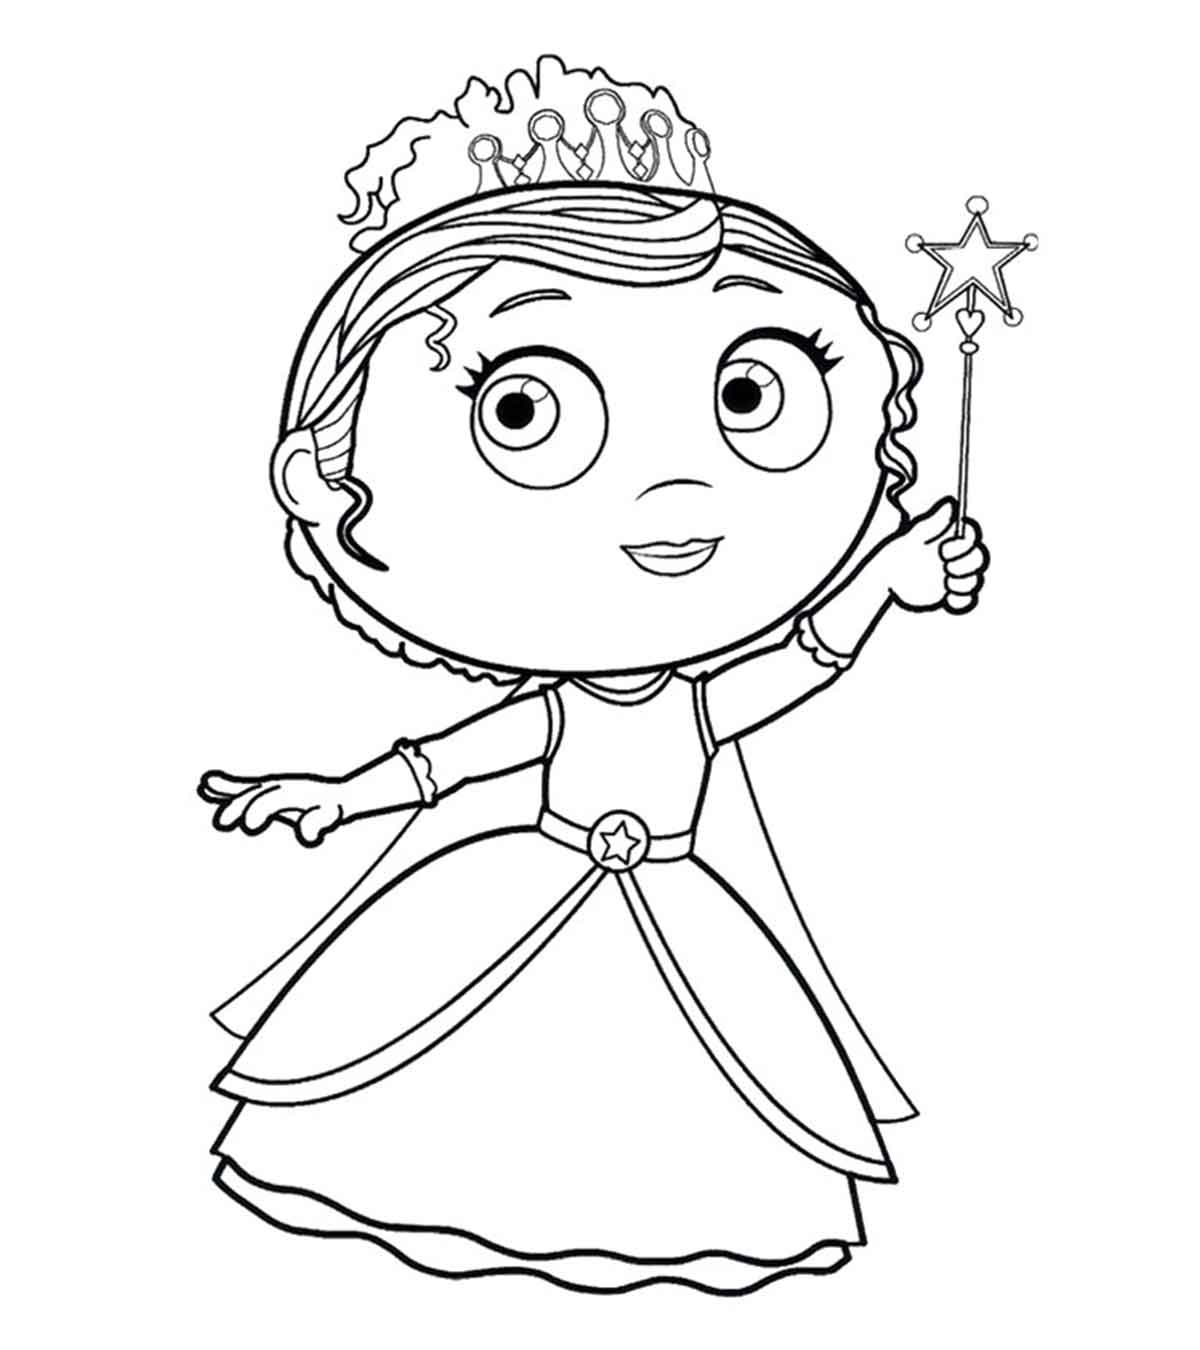 Top 10 Super Why Coloring Pages For Your Toddler